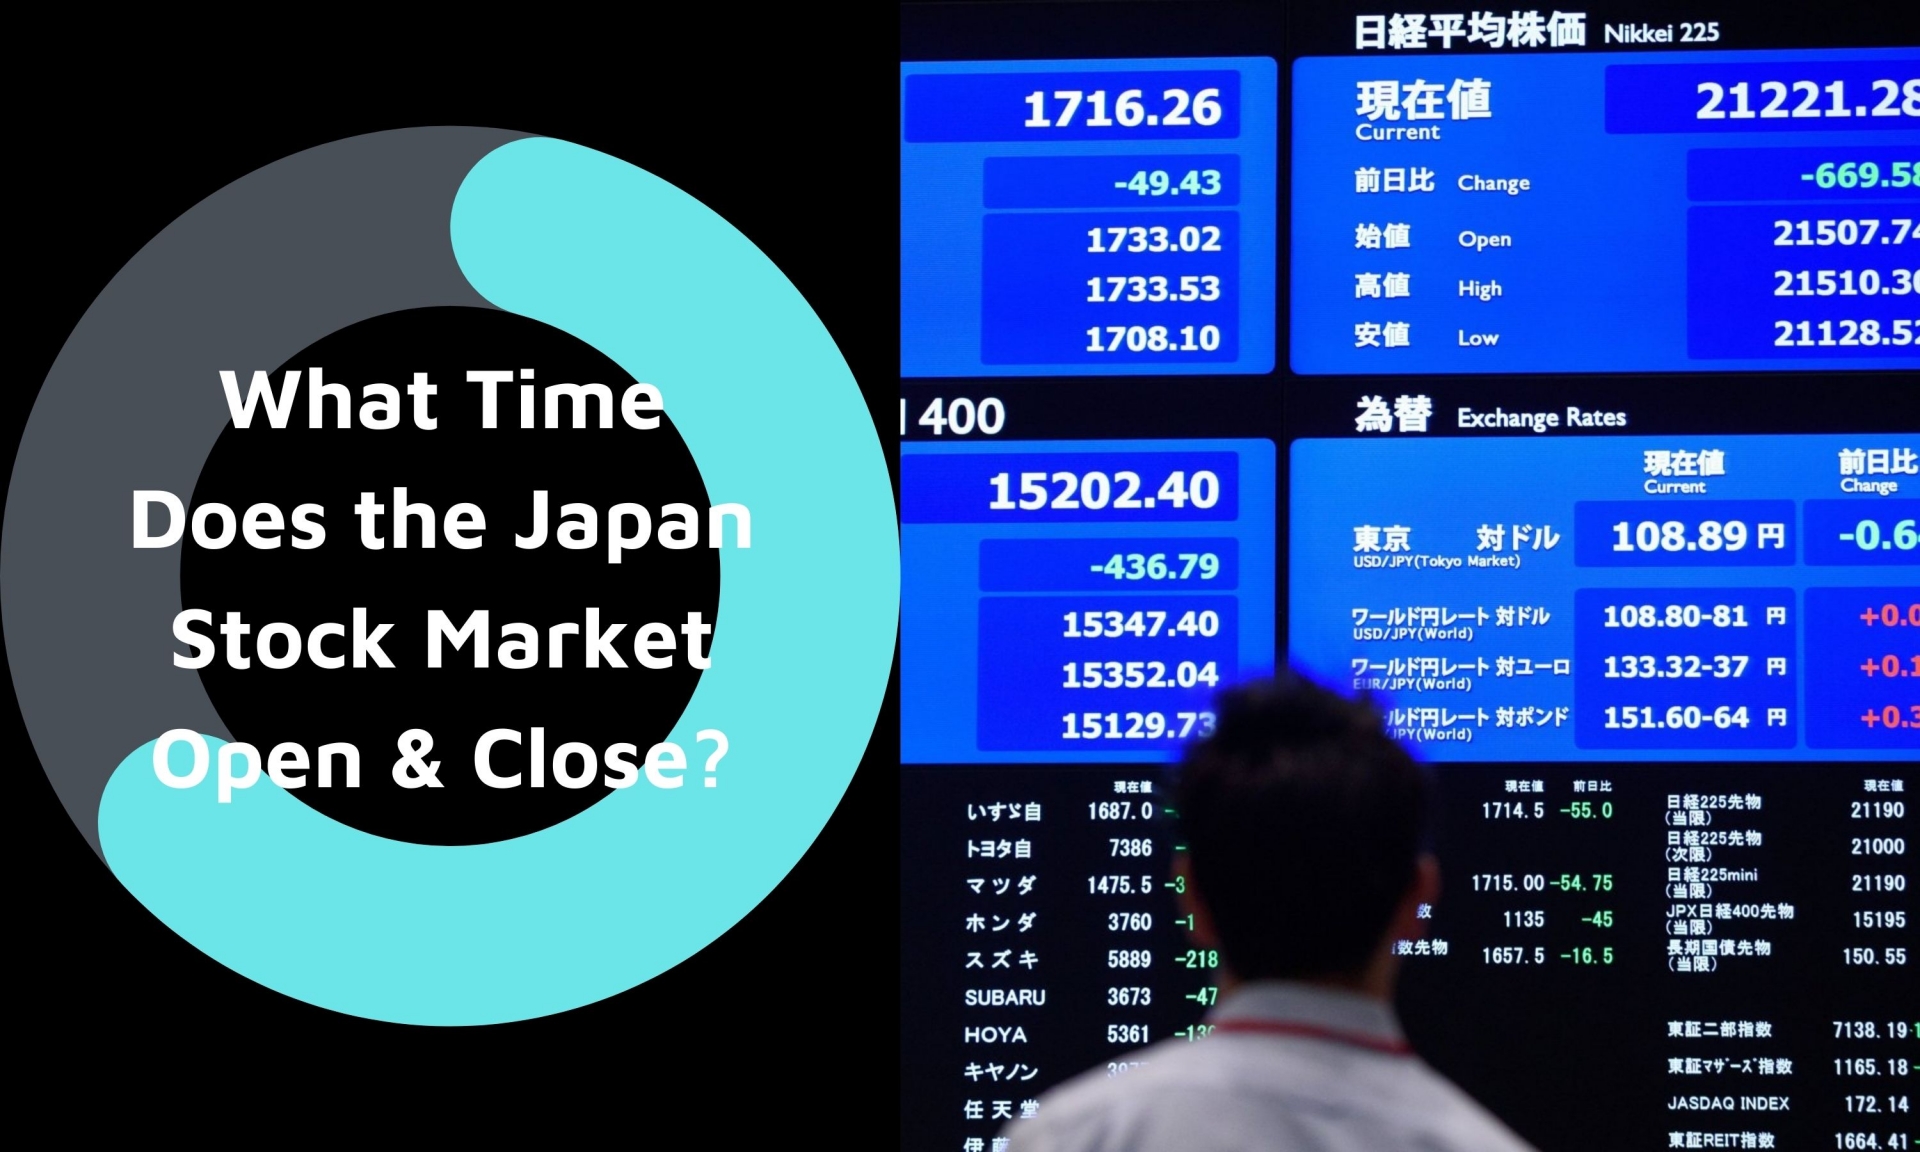 What Time Does the Japan Stock Market Open and Close?